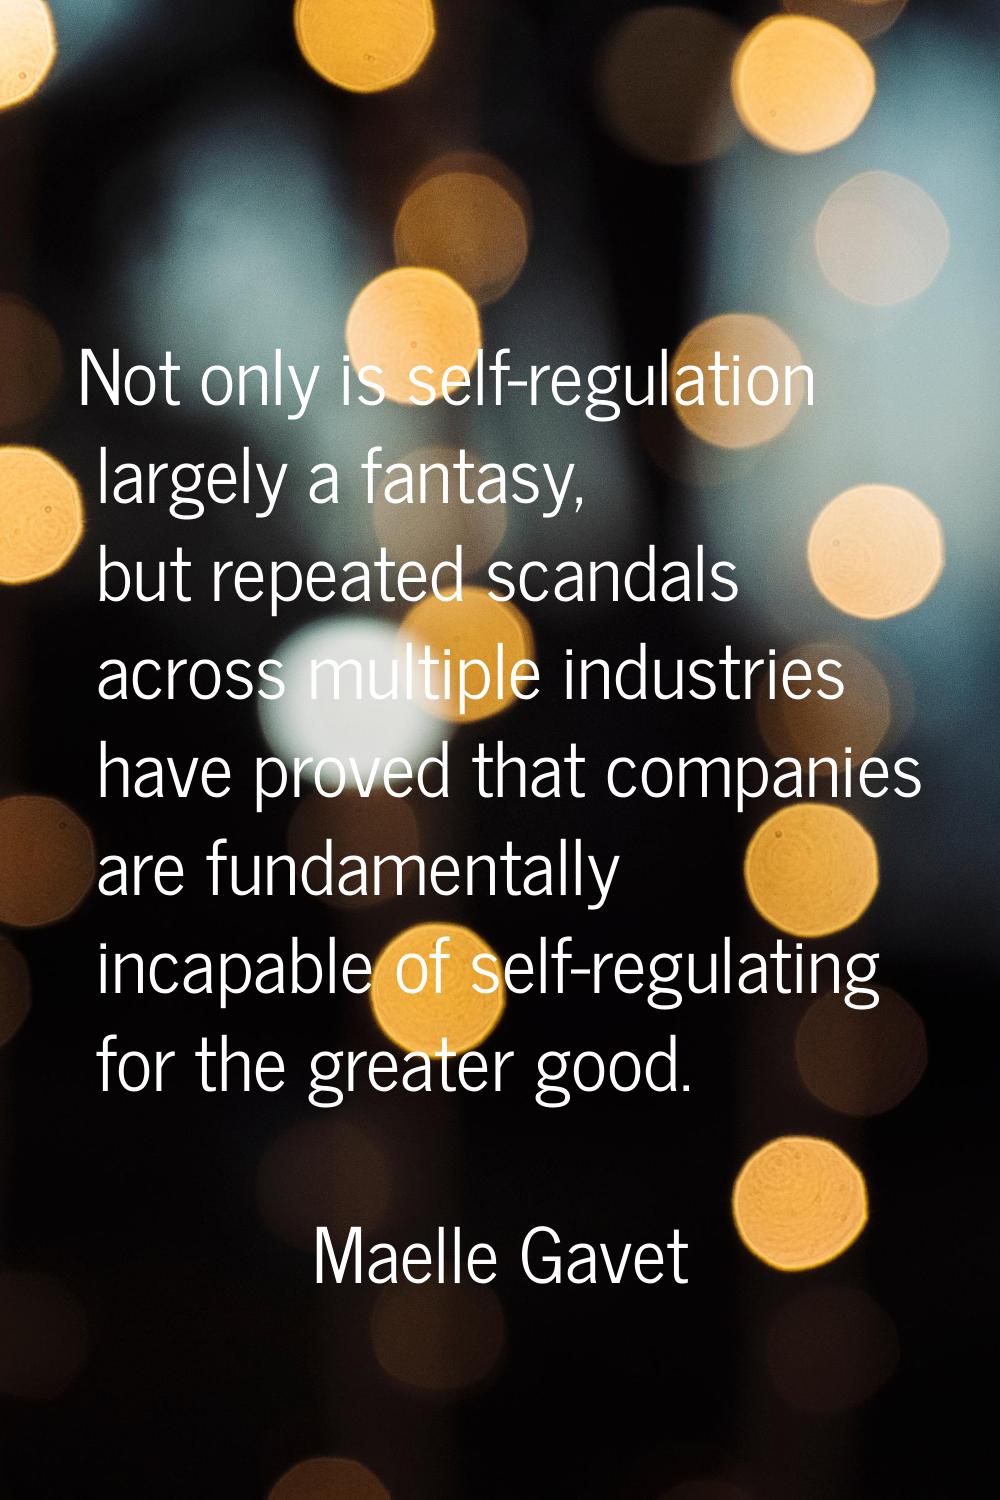 Not only is self-regulation largely a fantasy, but repeated scandals across multiple industries hav